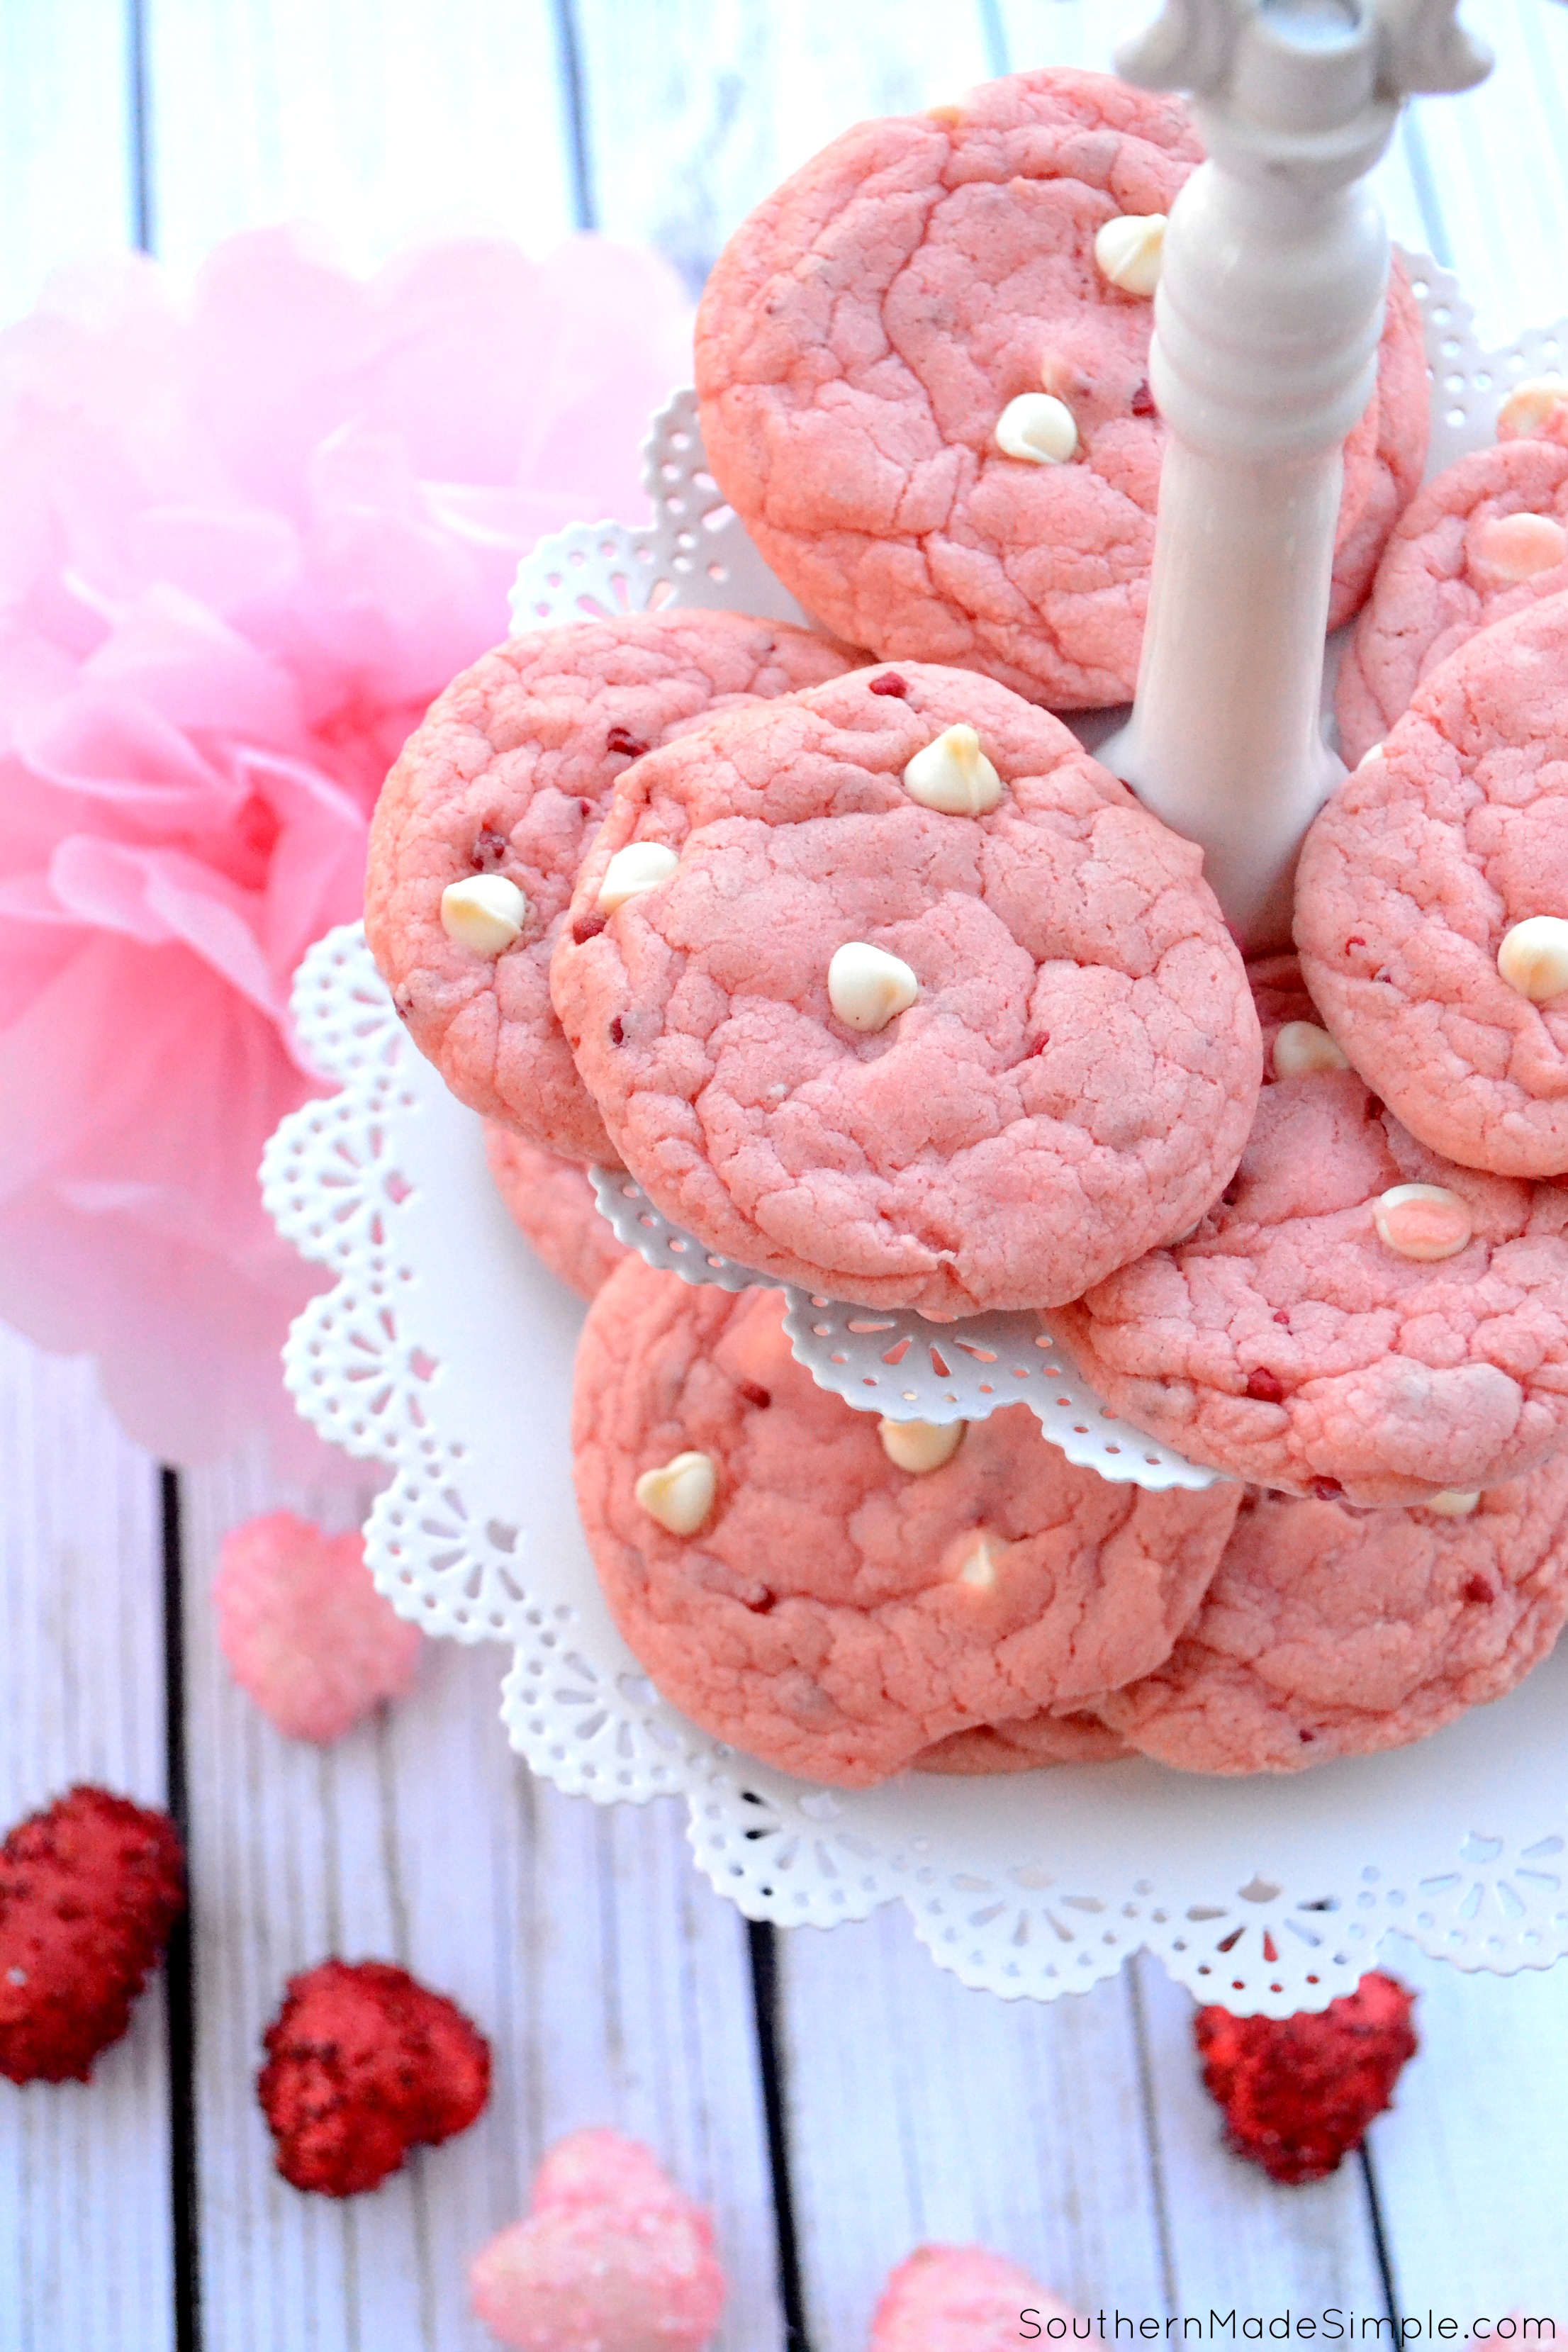 Strawberry Milkshake Cookies - These easy strawberry and white chocolate chip cookies taste just like a smooth strawberry shake, and are perfect for Valentine's Day!